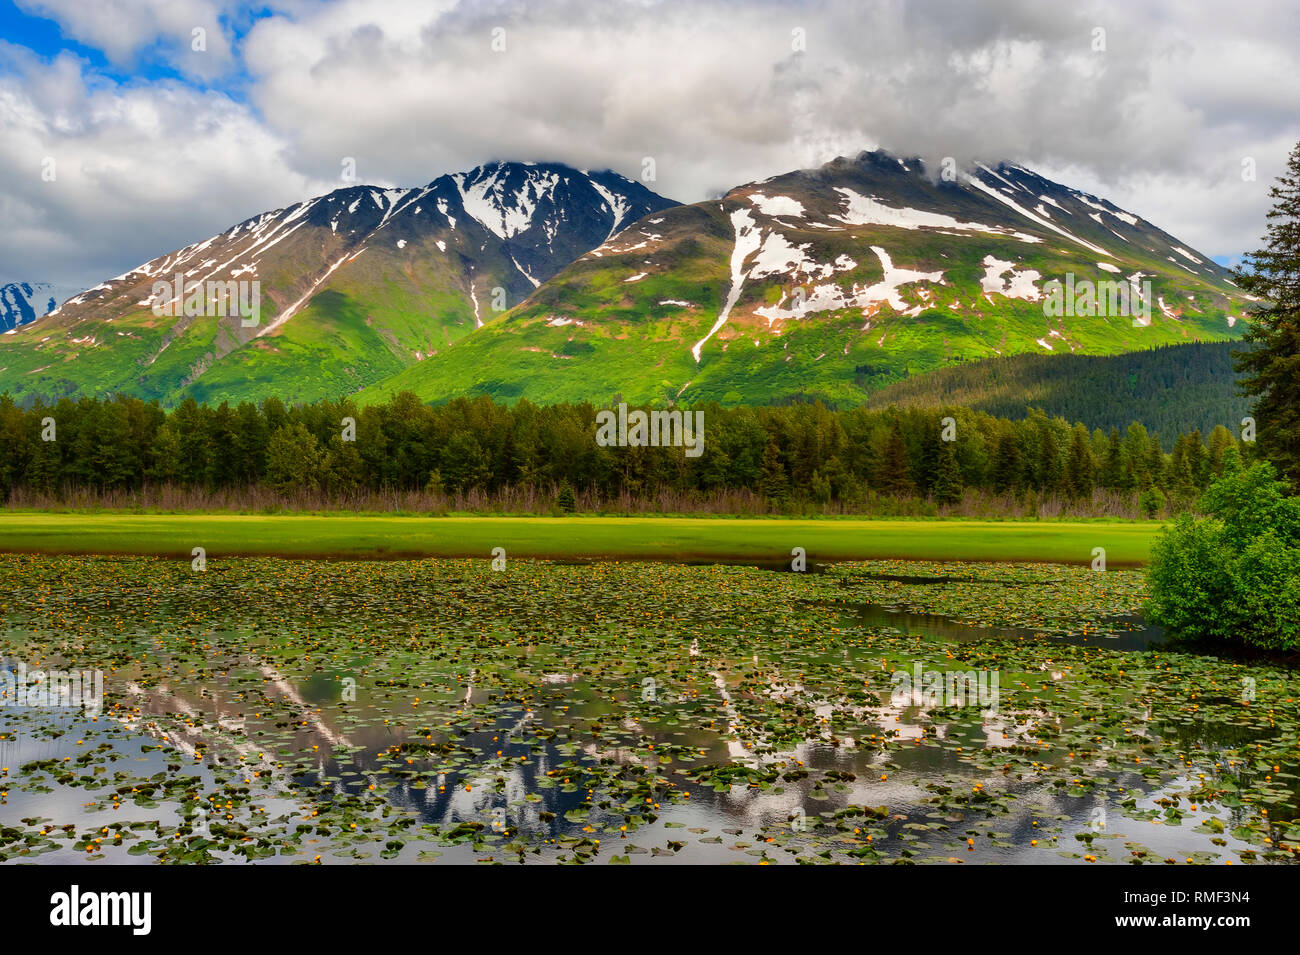 One of many scenic views along the Seward Highway in Chugach National Forest in Alaska.  The mountains reflect in the pond of wild lilies in June. Stock Photo